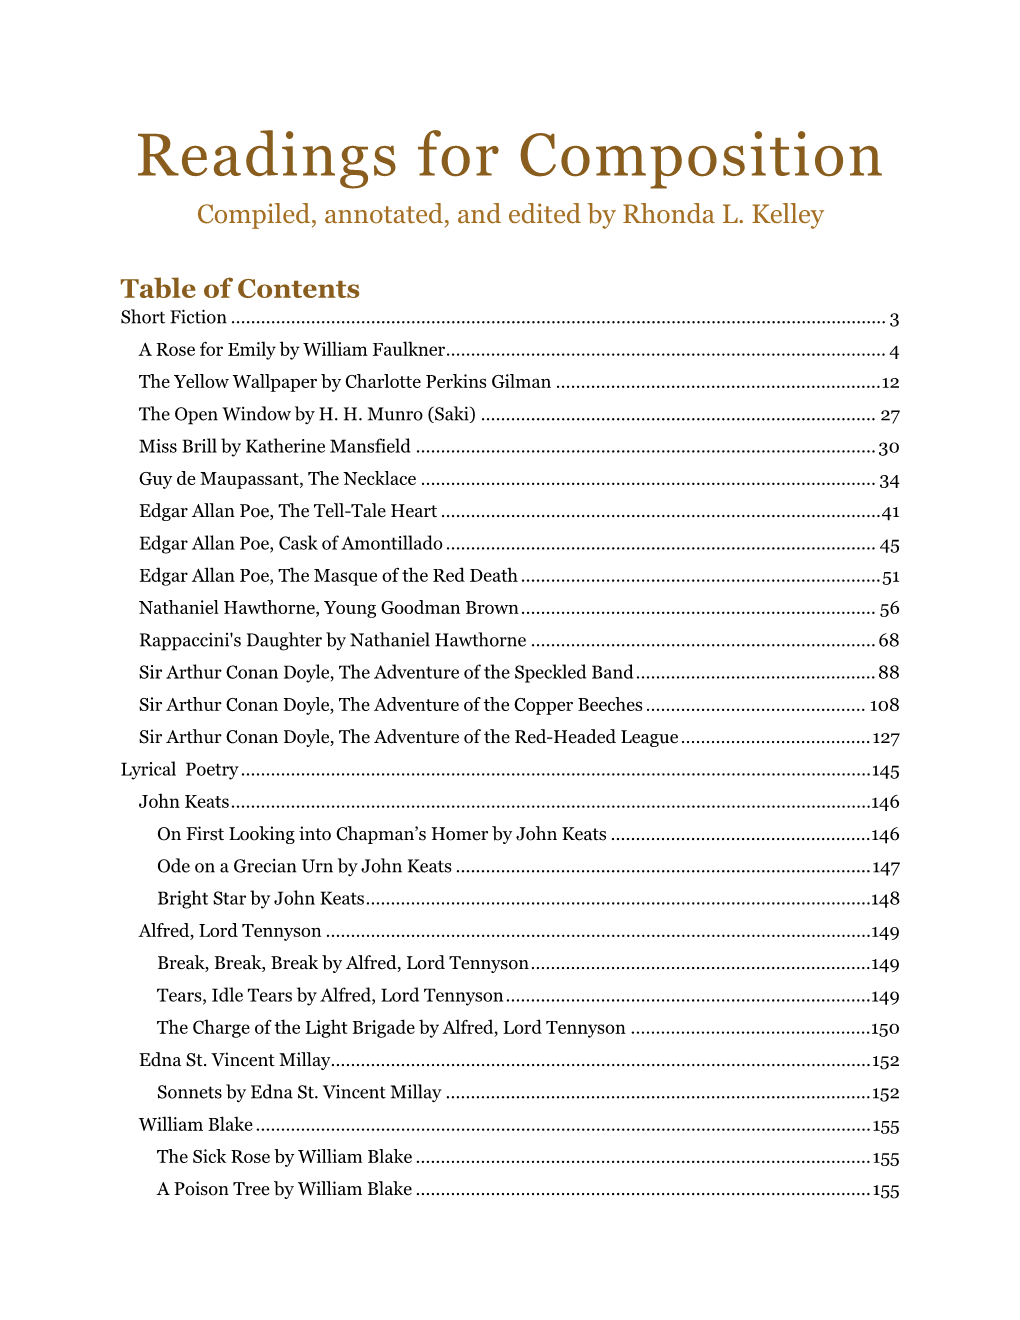 Readings for Composition Compiled, Annotated, and Edited by Rhonda L